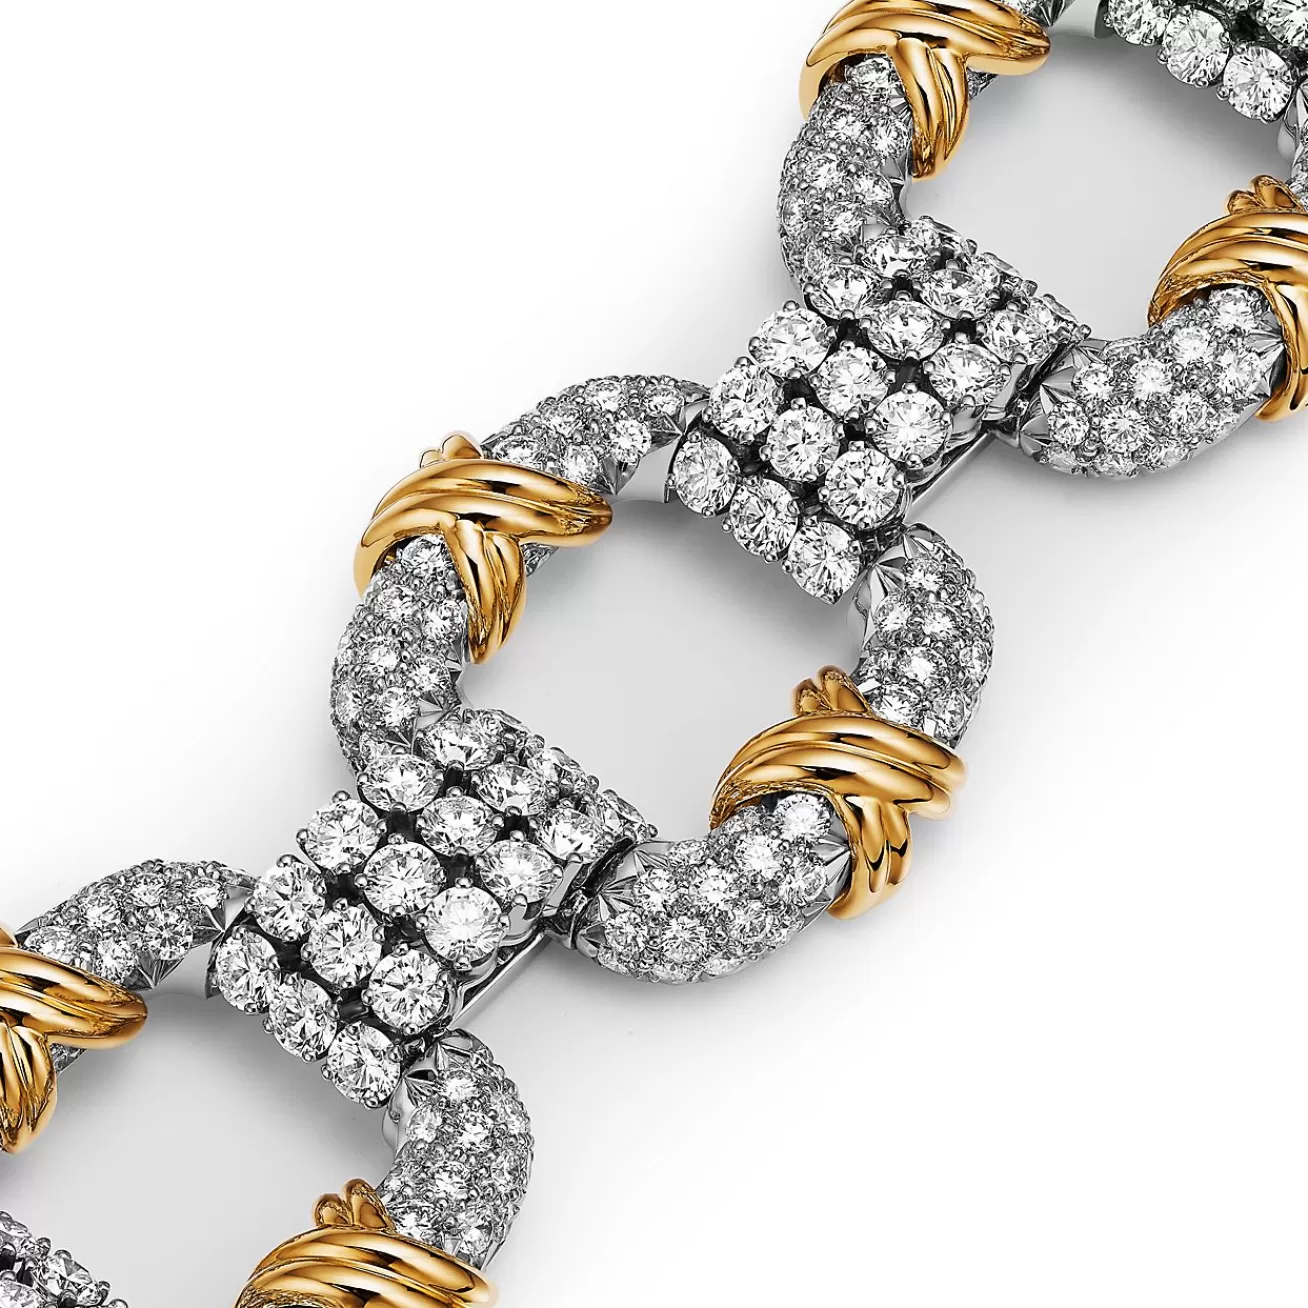 Tiffany & Co. Bracelet in Platinum and Yellow Gold with Diamonds | ^ Bracelets | Gold Jewelry